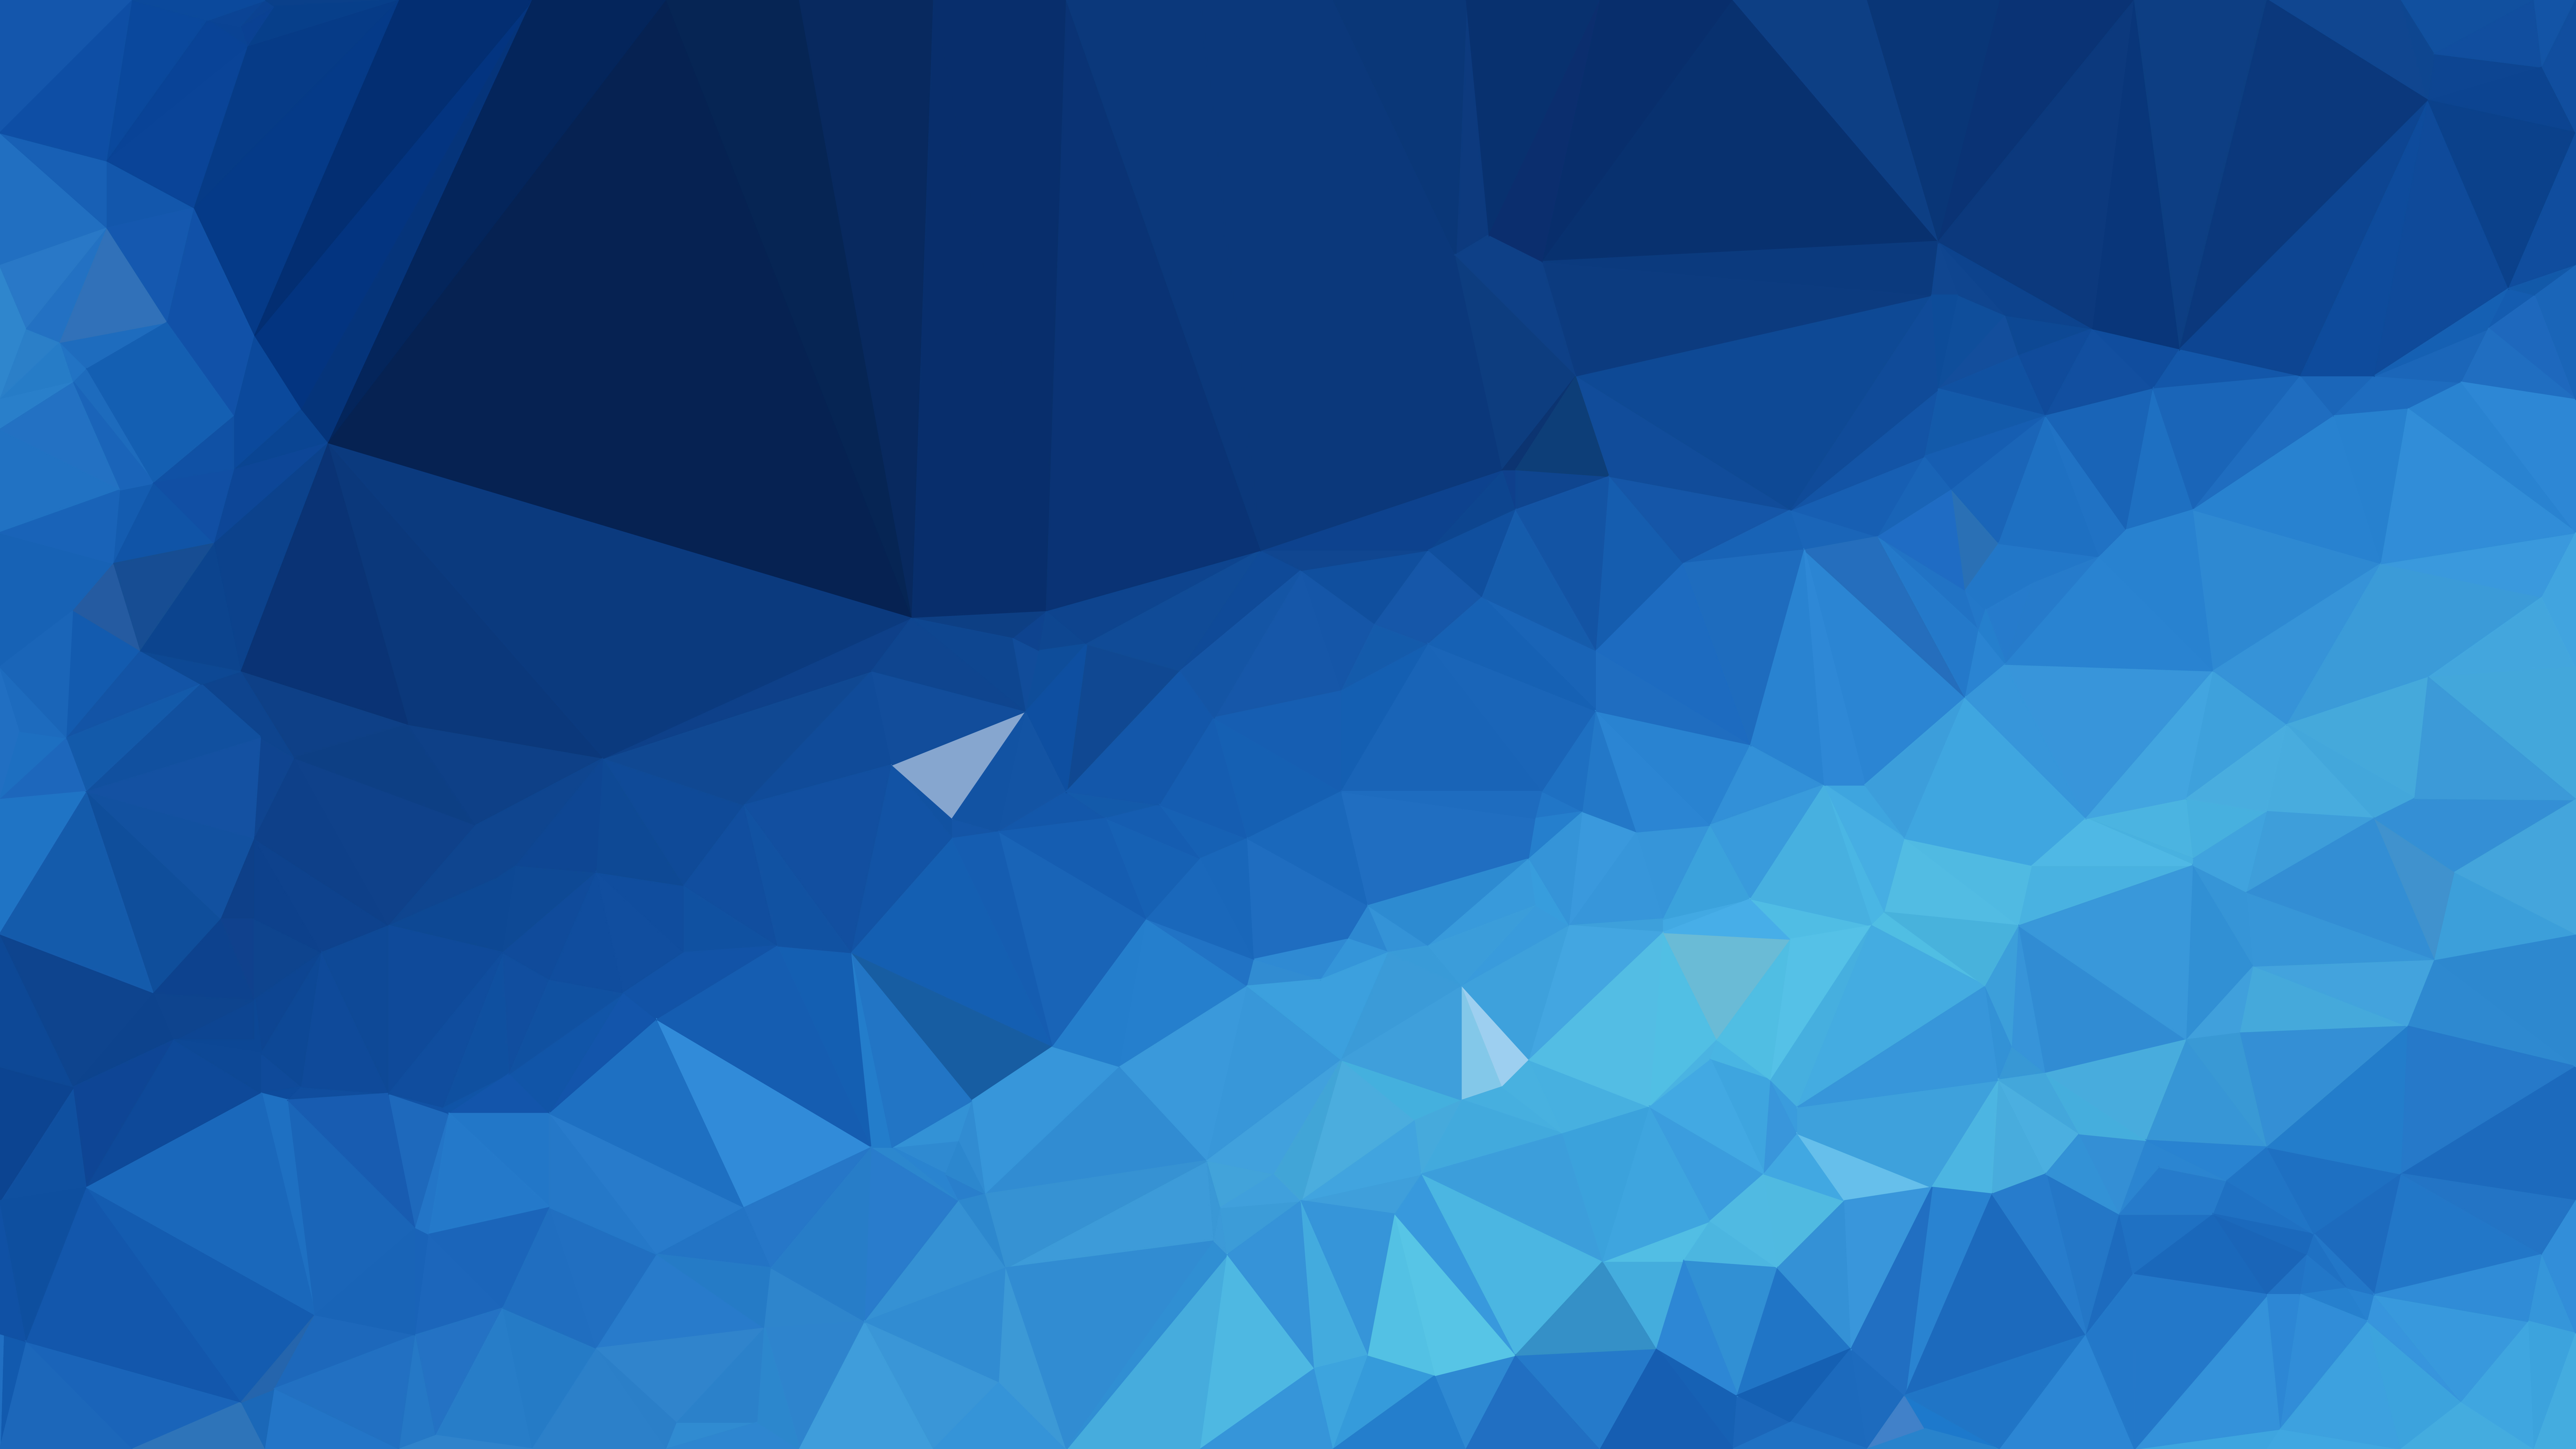 Free Dark Blue Low Poly Abstract Background Design Illustrator